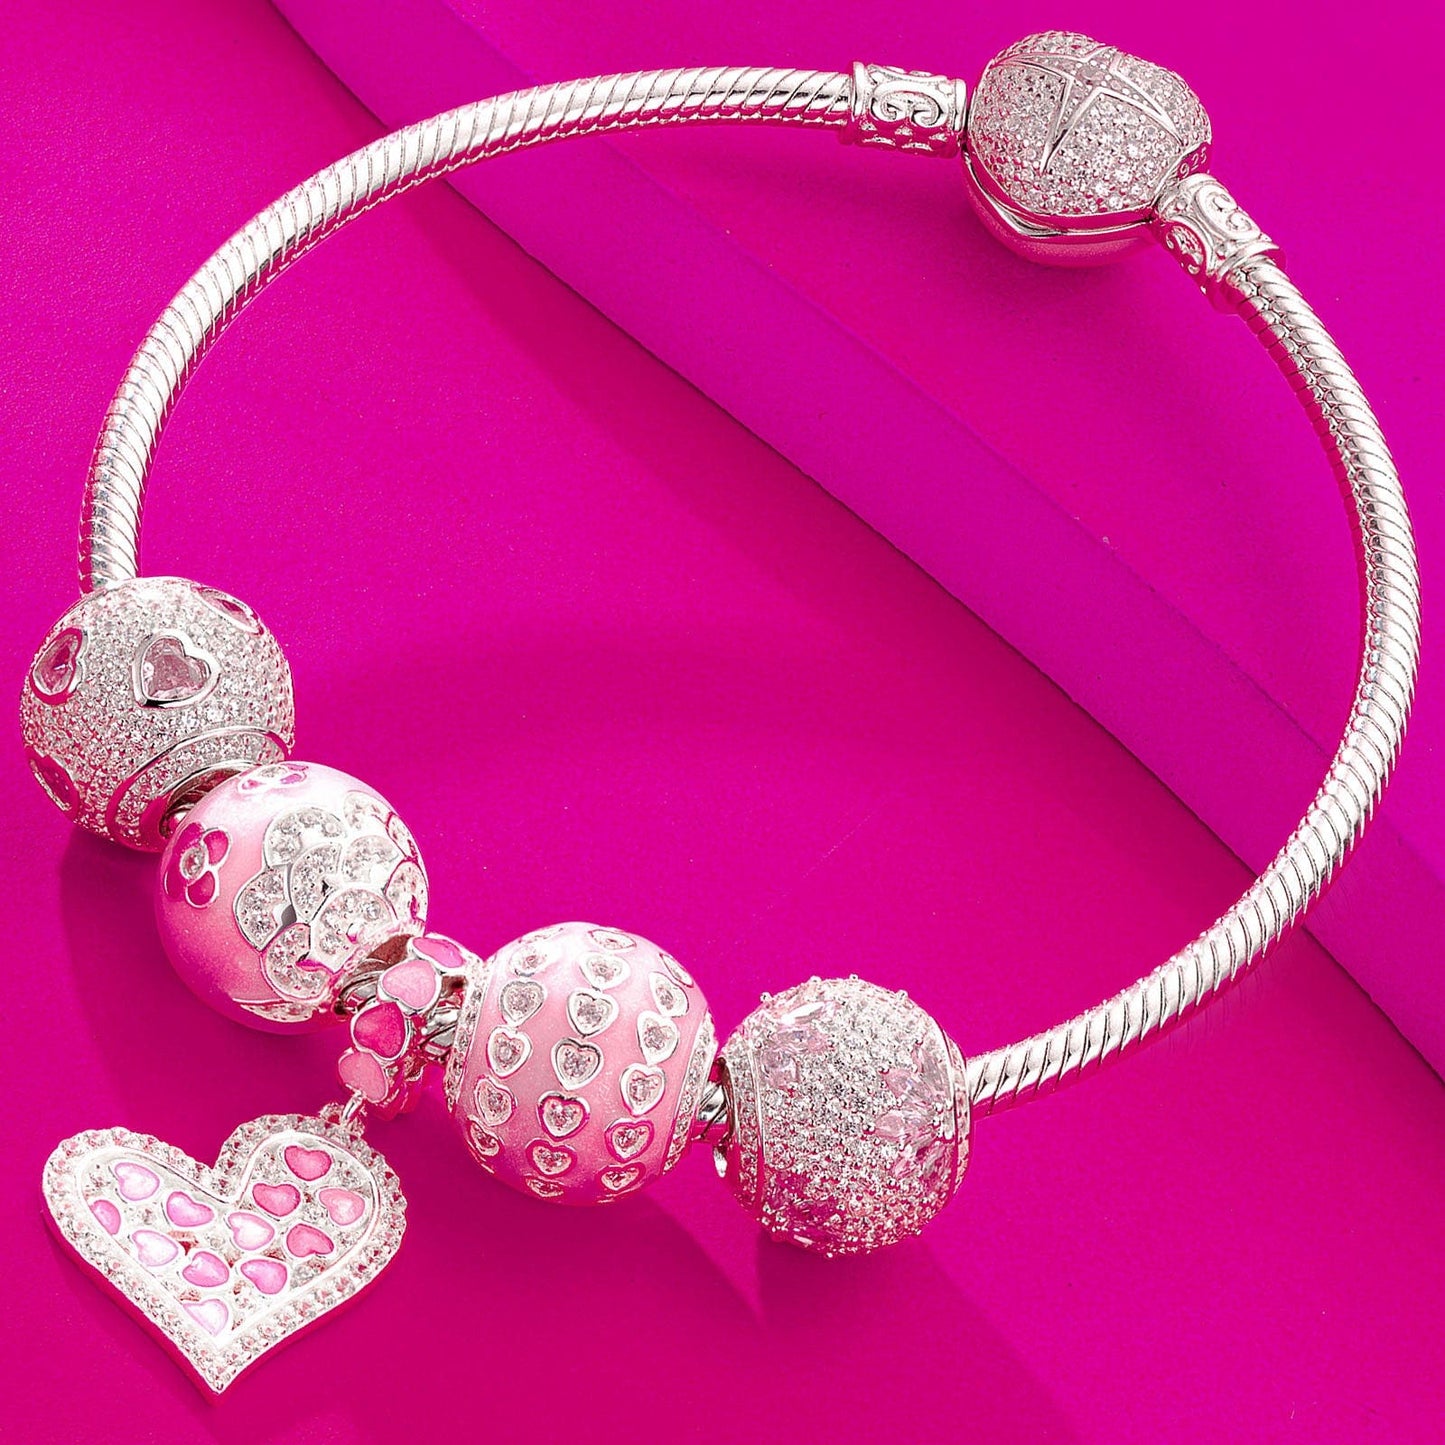 Sterling Silver Pink Girlish Charms Bracelet Set With Enamel In White Gold Plated